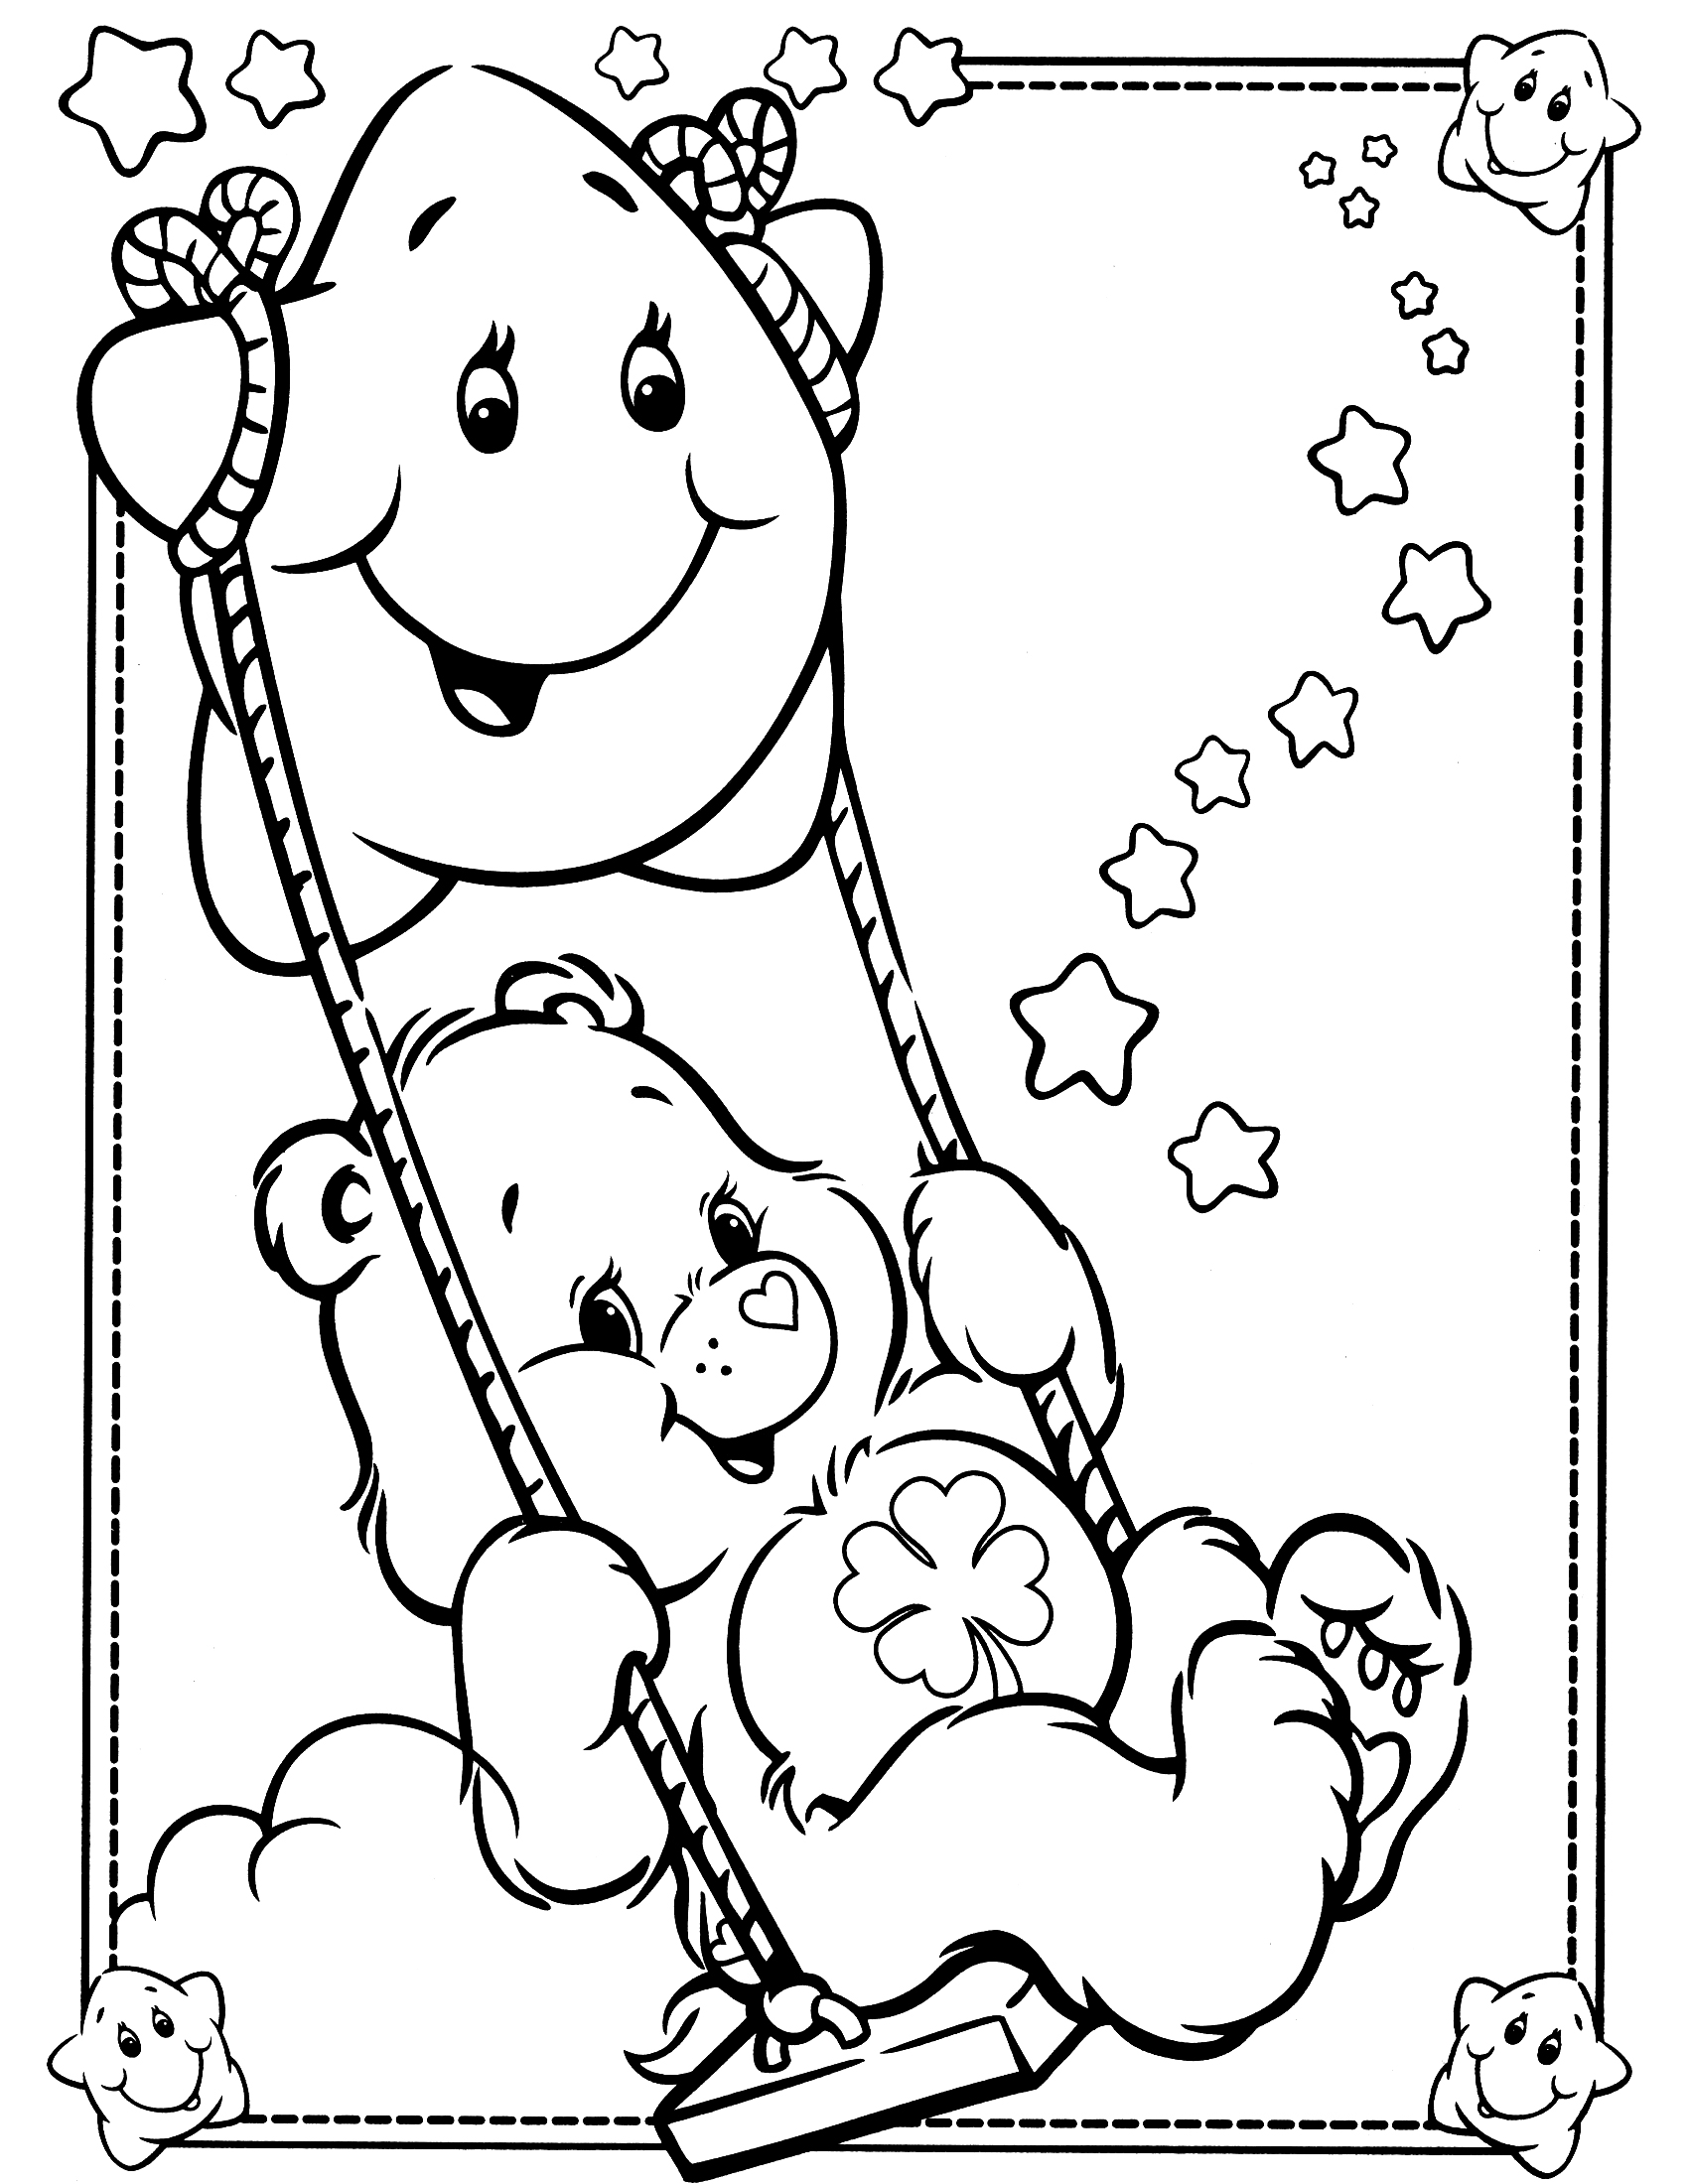 Care Bears (Cartoons) – Printable coloring pages